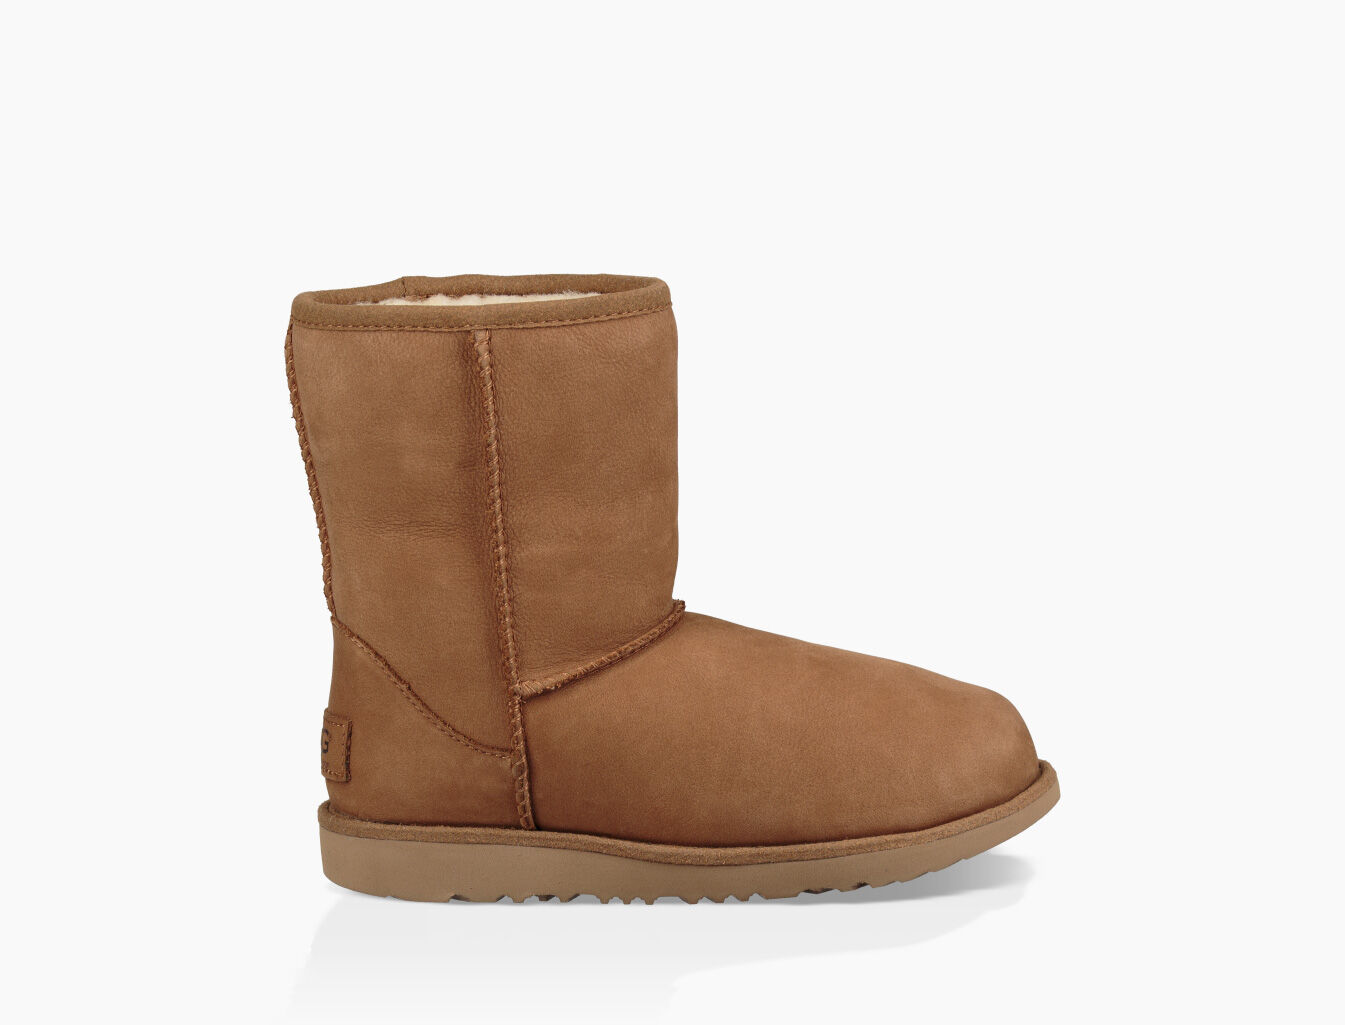 ugg style boots for toddlers